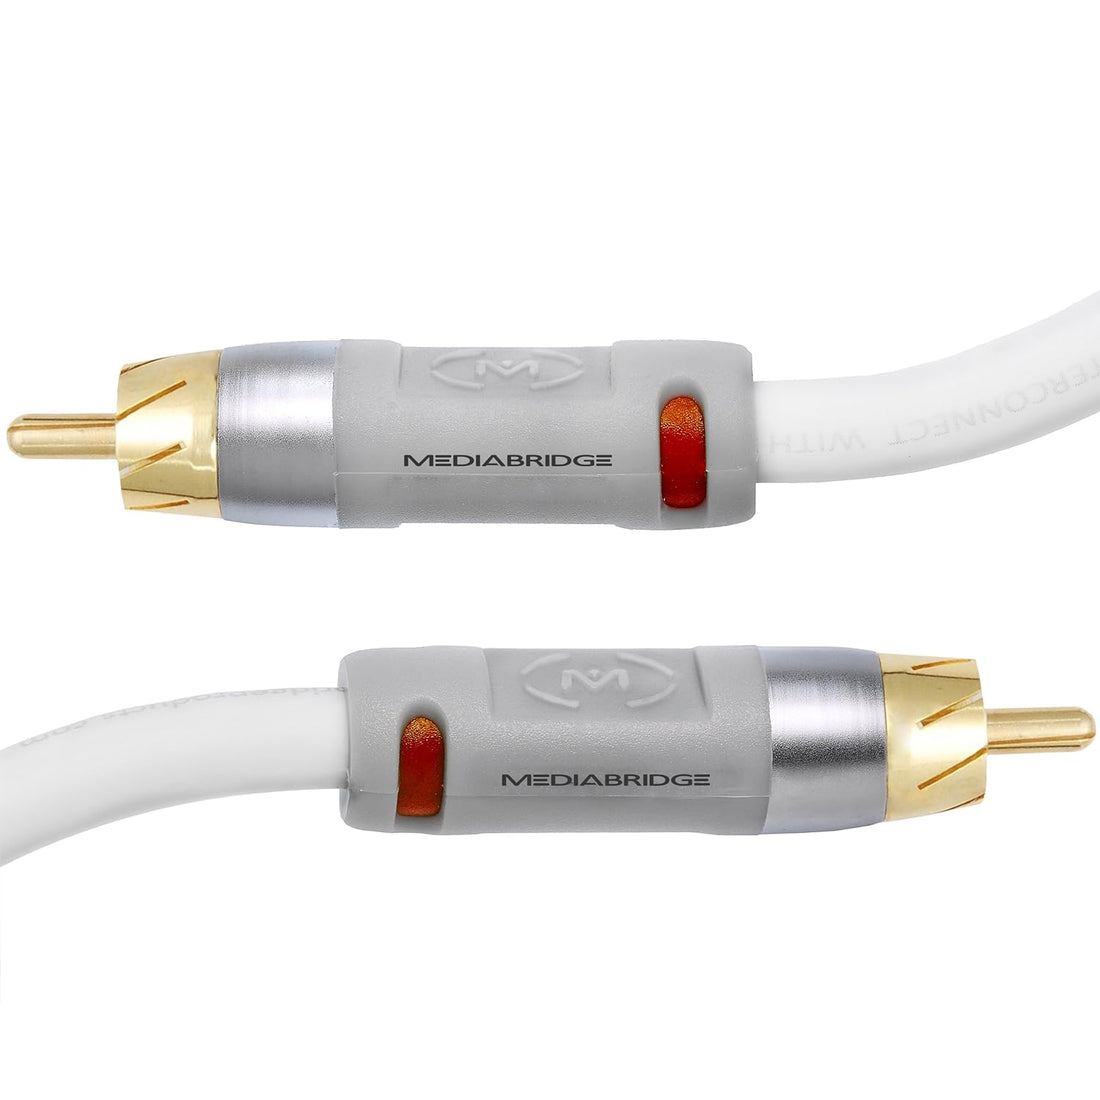 Mediabridge ULTRA Series Digital Audio Coaxial Cable (15 Feet) - Dual Shielded with RCA to RCA Gold-Plated Connectors - White